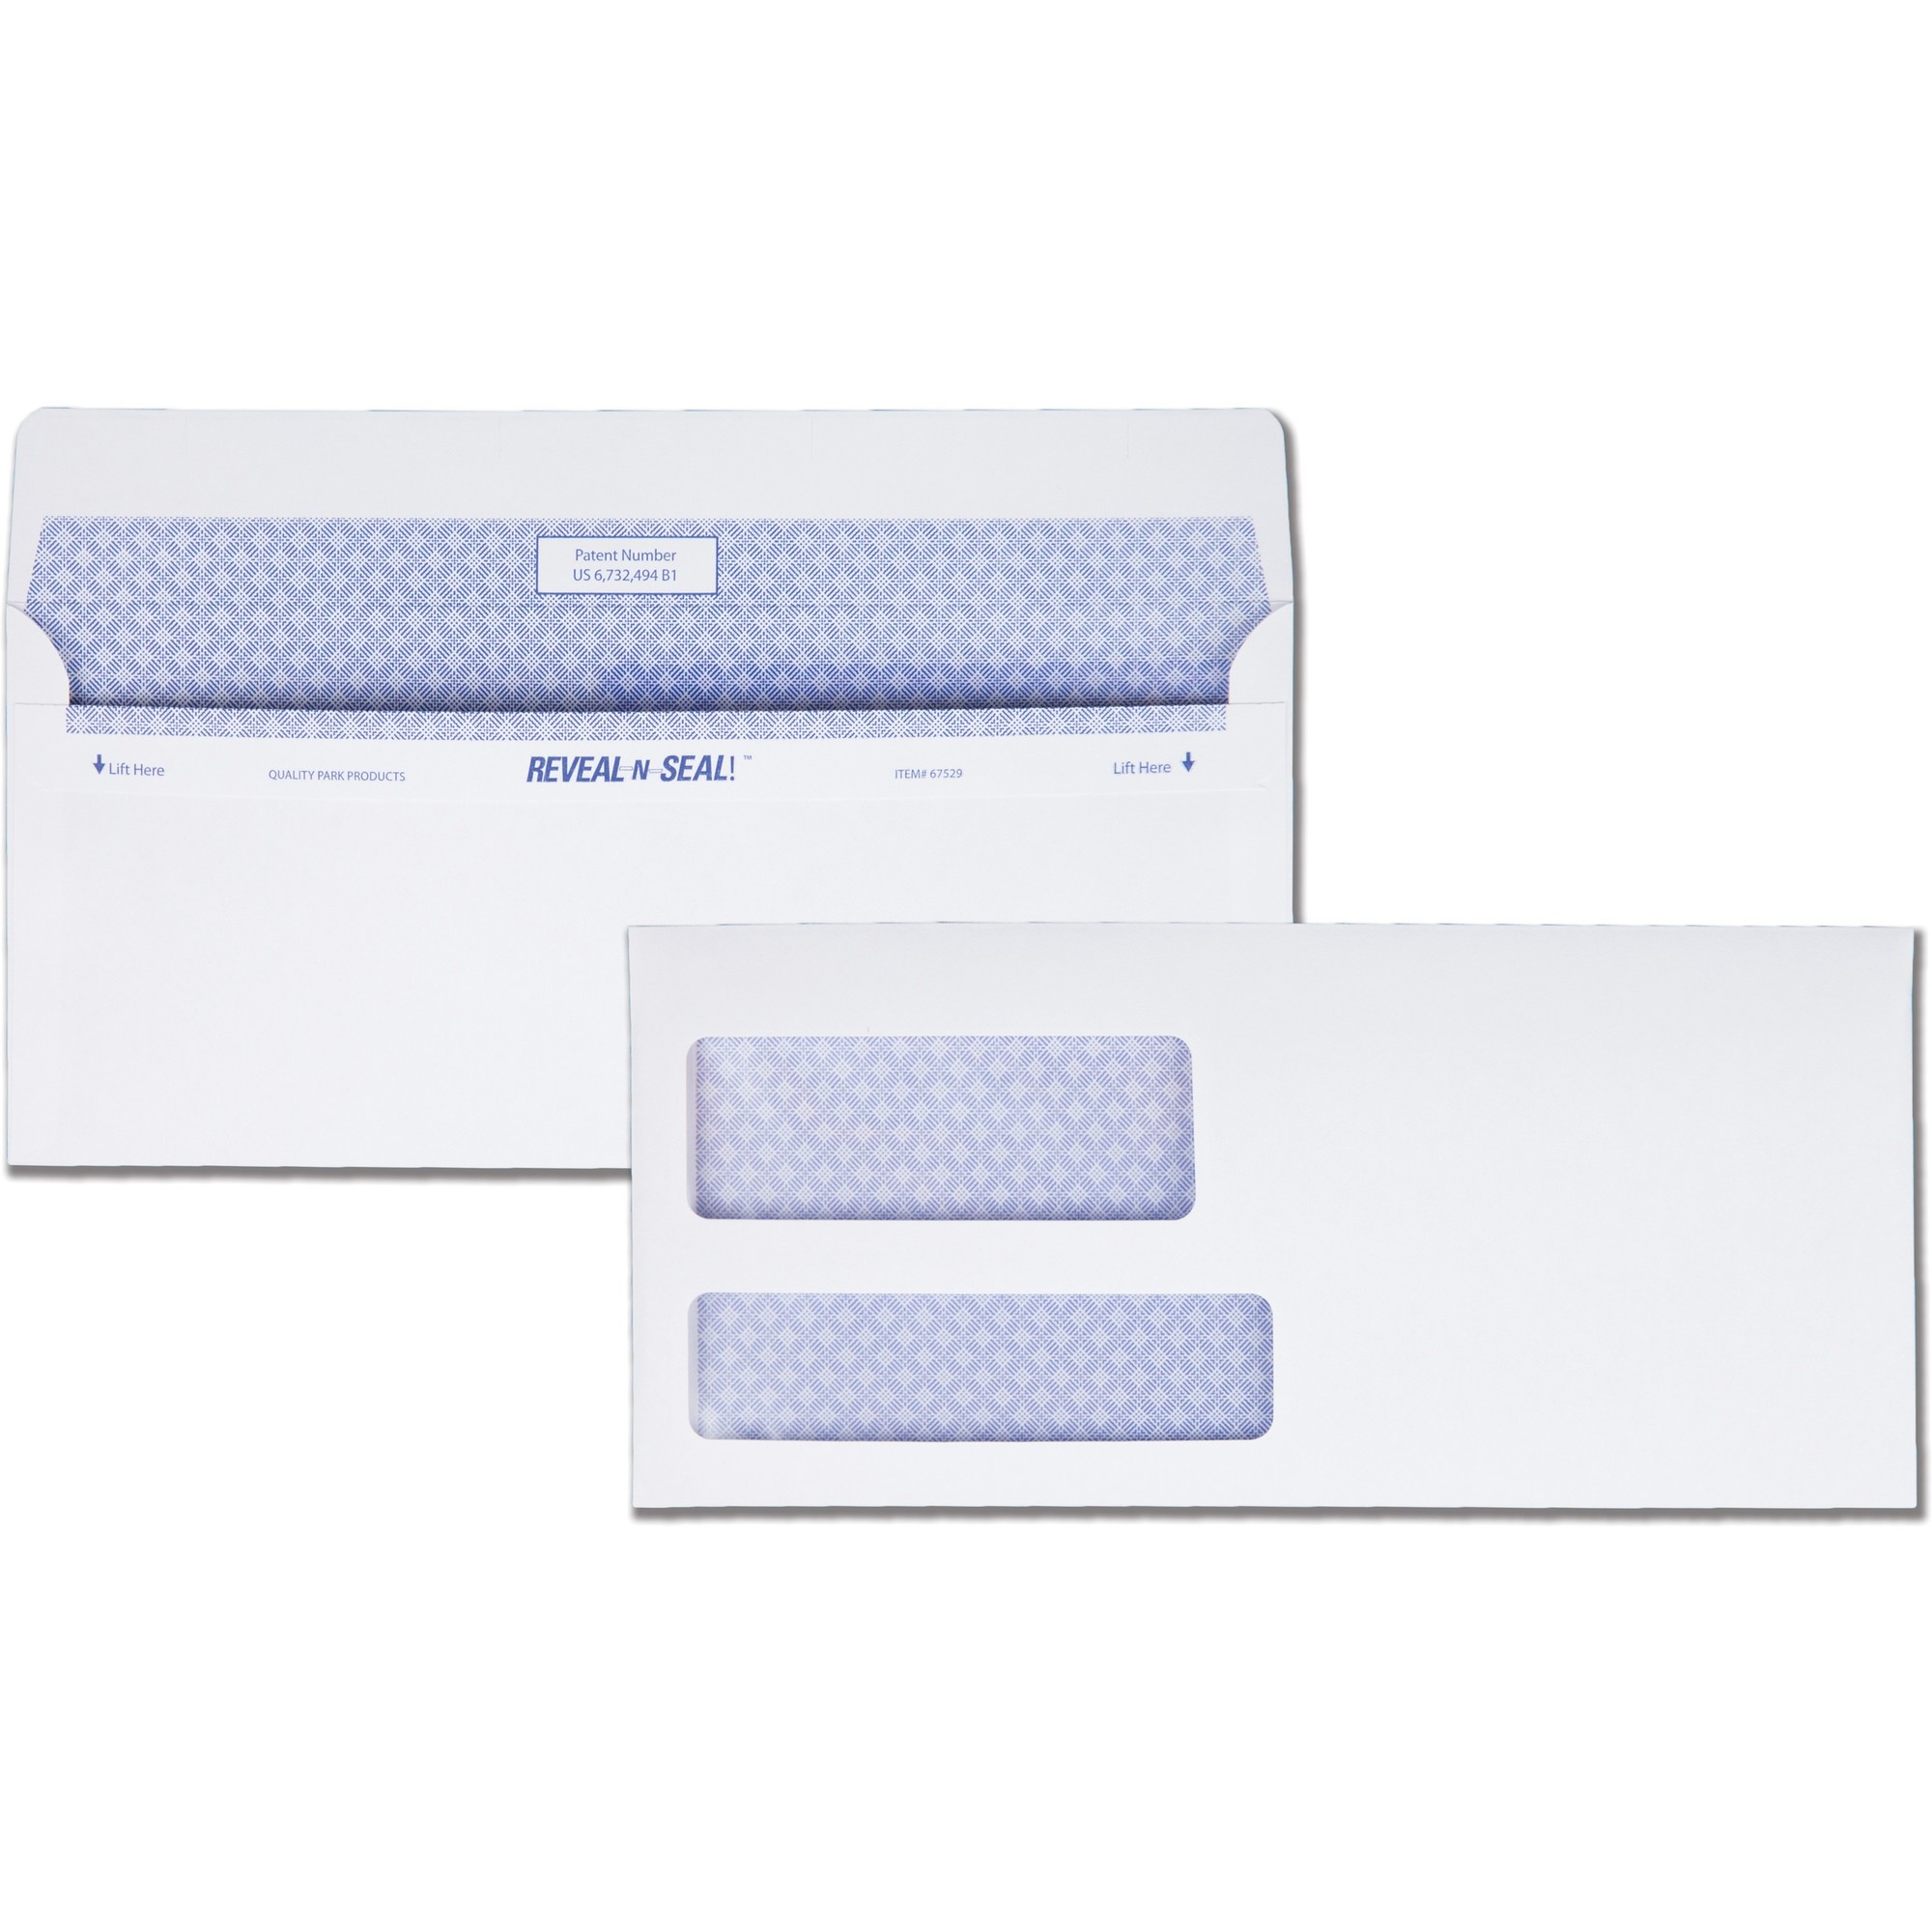 Quality Park Reveal-n-Seal Double Window Envelopes - Double Window - #9 - 8 7/8" Width x 3 7/8" Length - 24 lb - 500 / Box - Whi